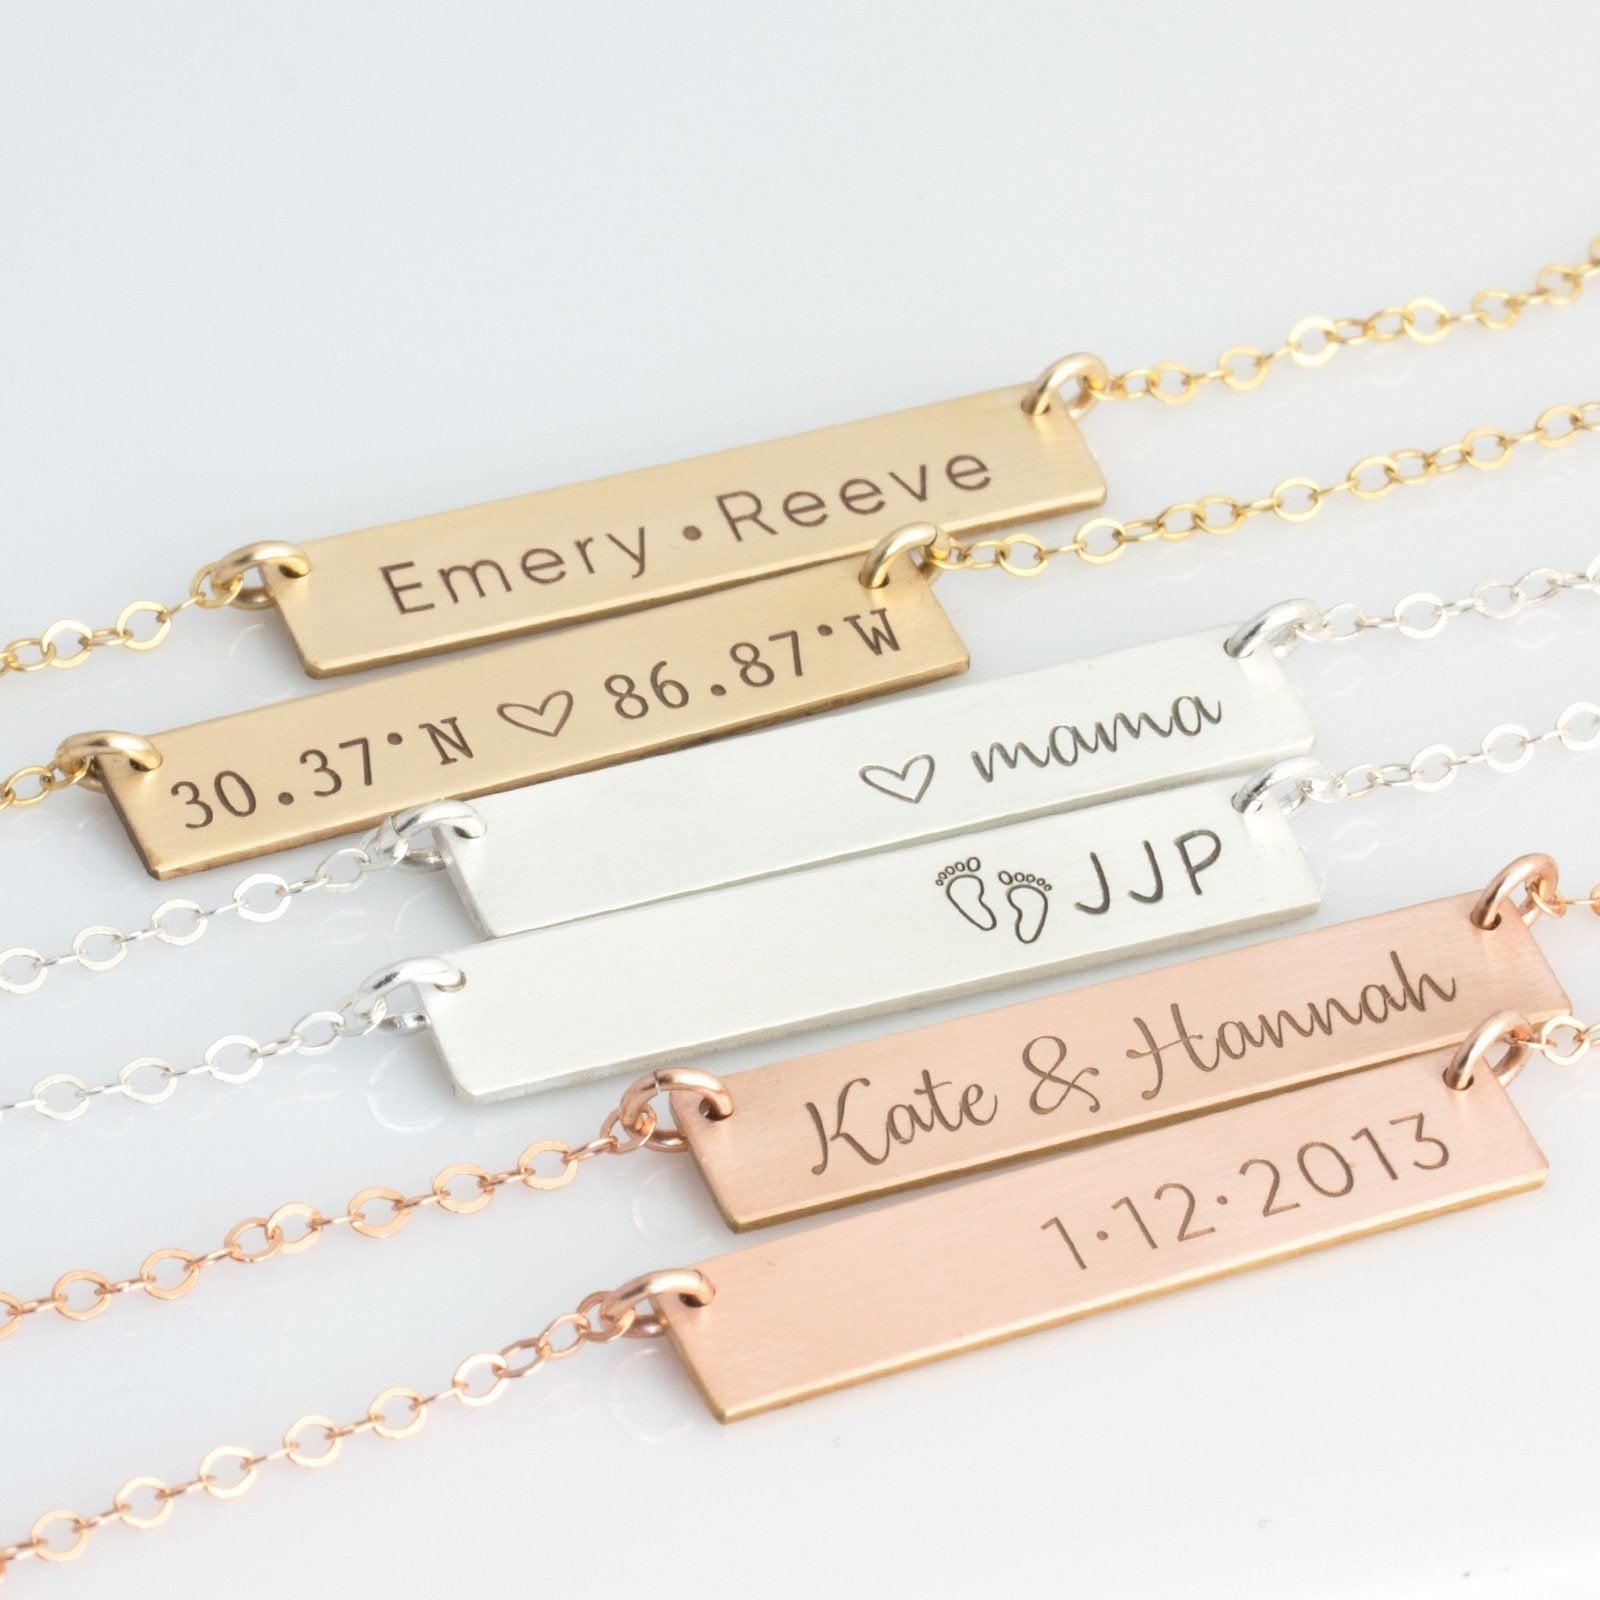 Stainless steel gold bar pendant with free name engraving, gift idea, in-house engraving Hashtag Bamboo, fast shipping anywhere in SA.